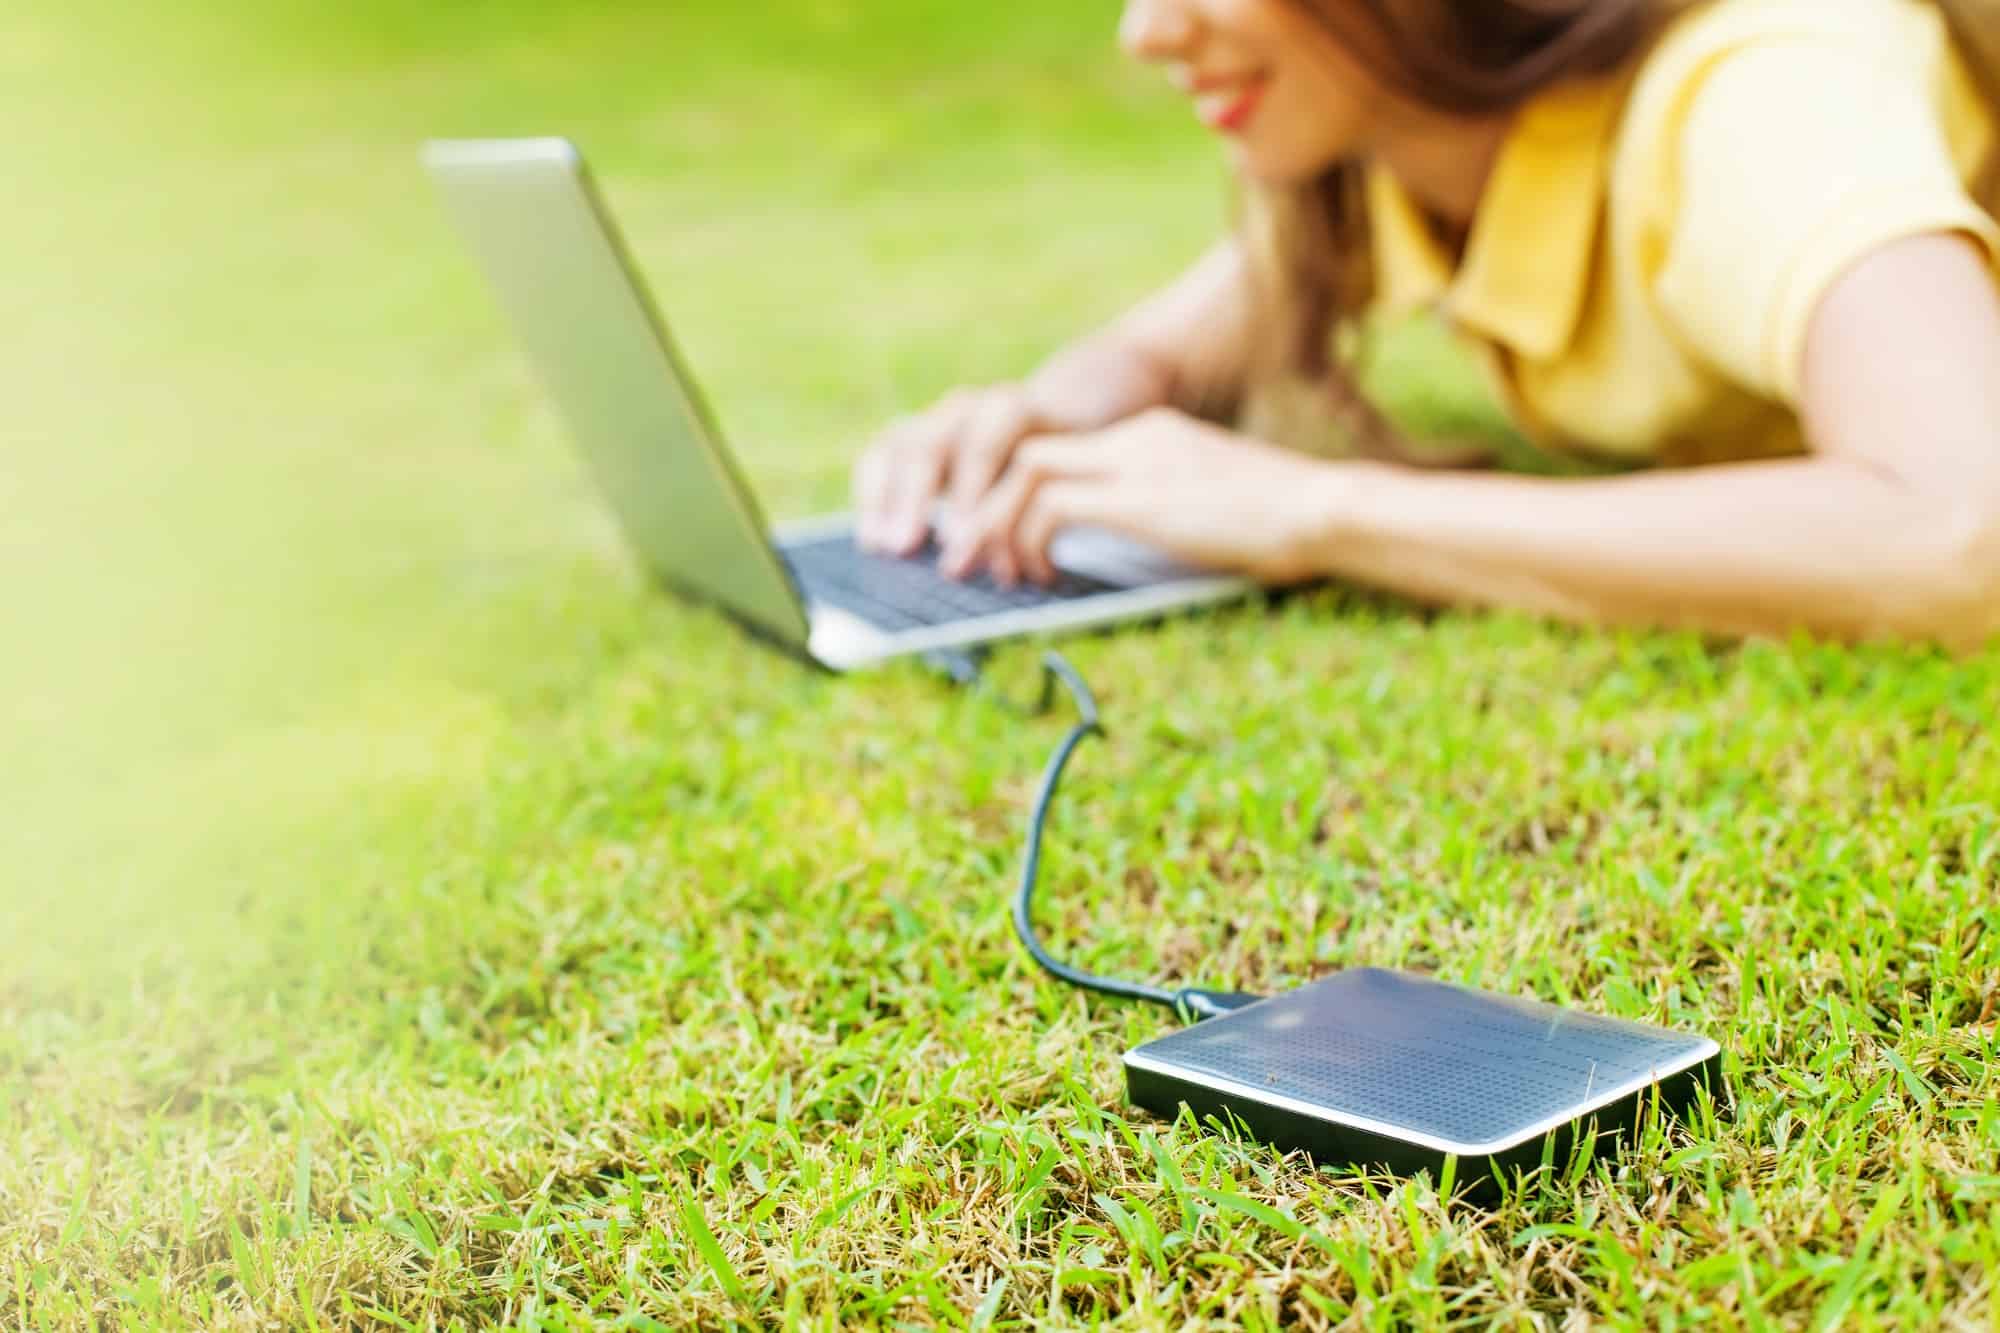 Woman lying on grass using laptop with portable hard drive connected to it